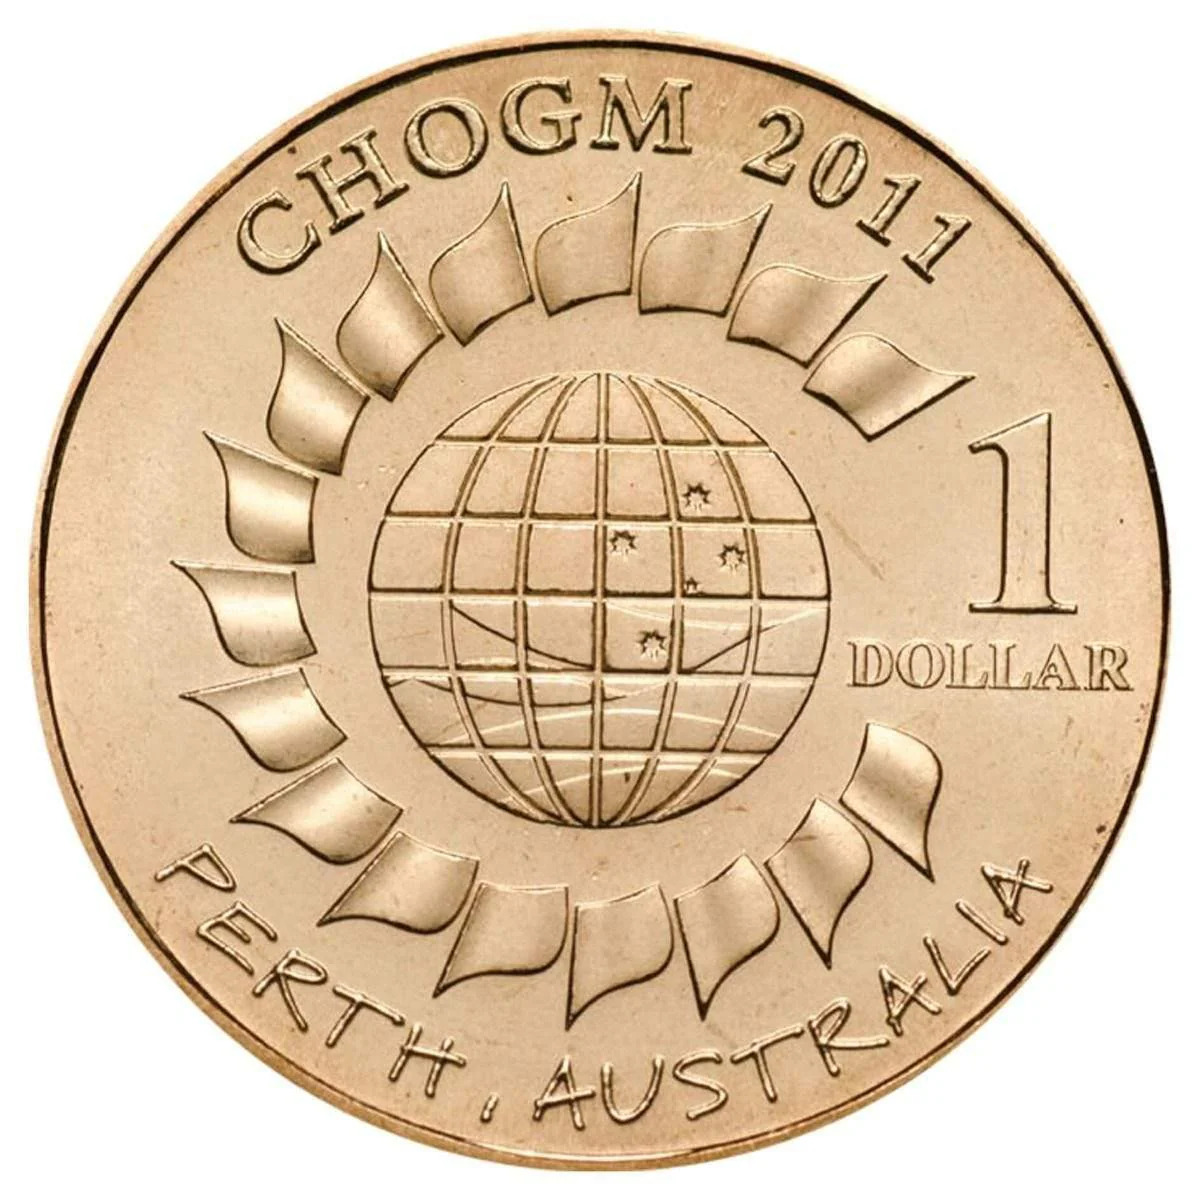 2011 $1 One Dollar Coin - CHOGM Perth Australia - Low Mintage Commemorative Coin